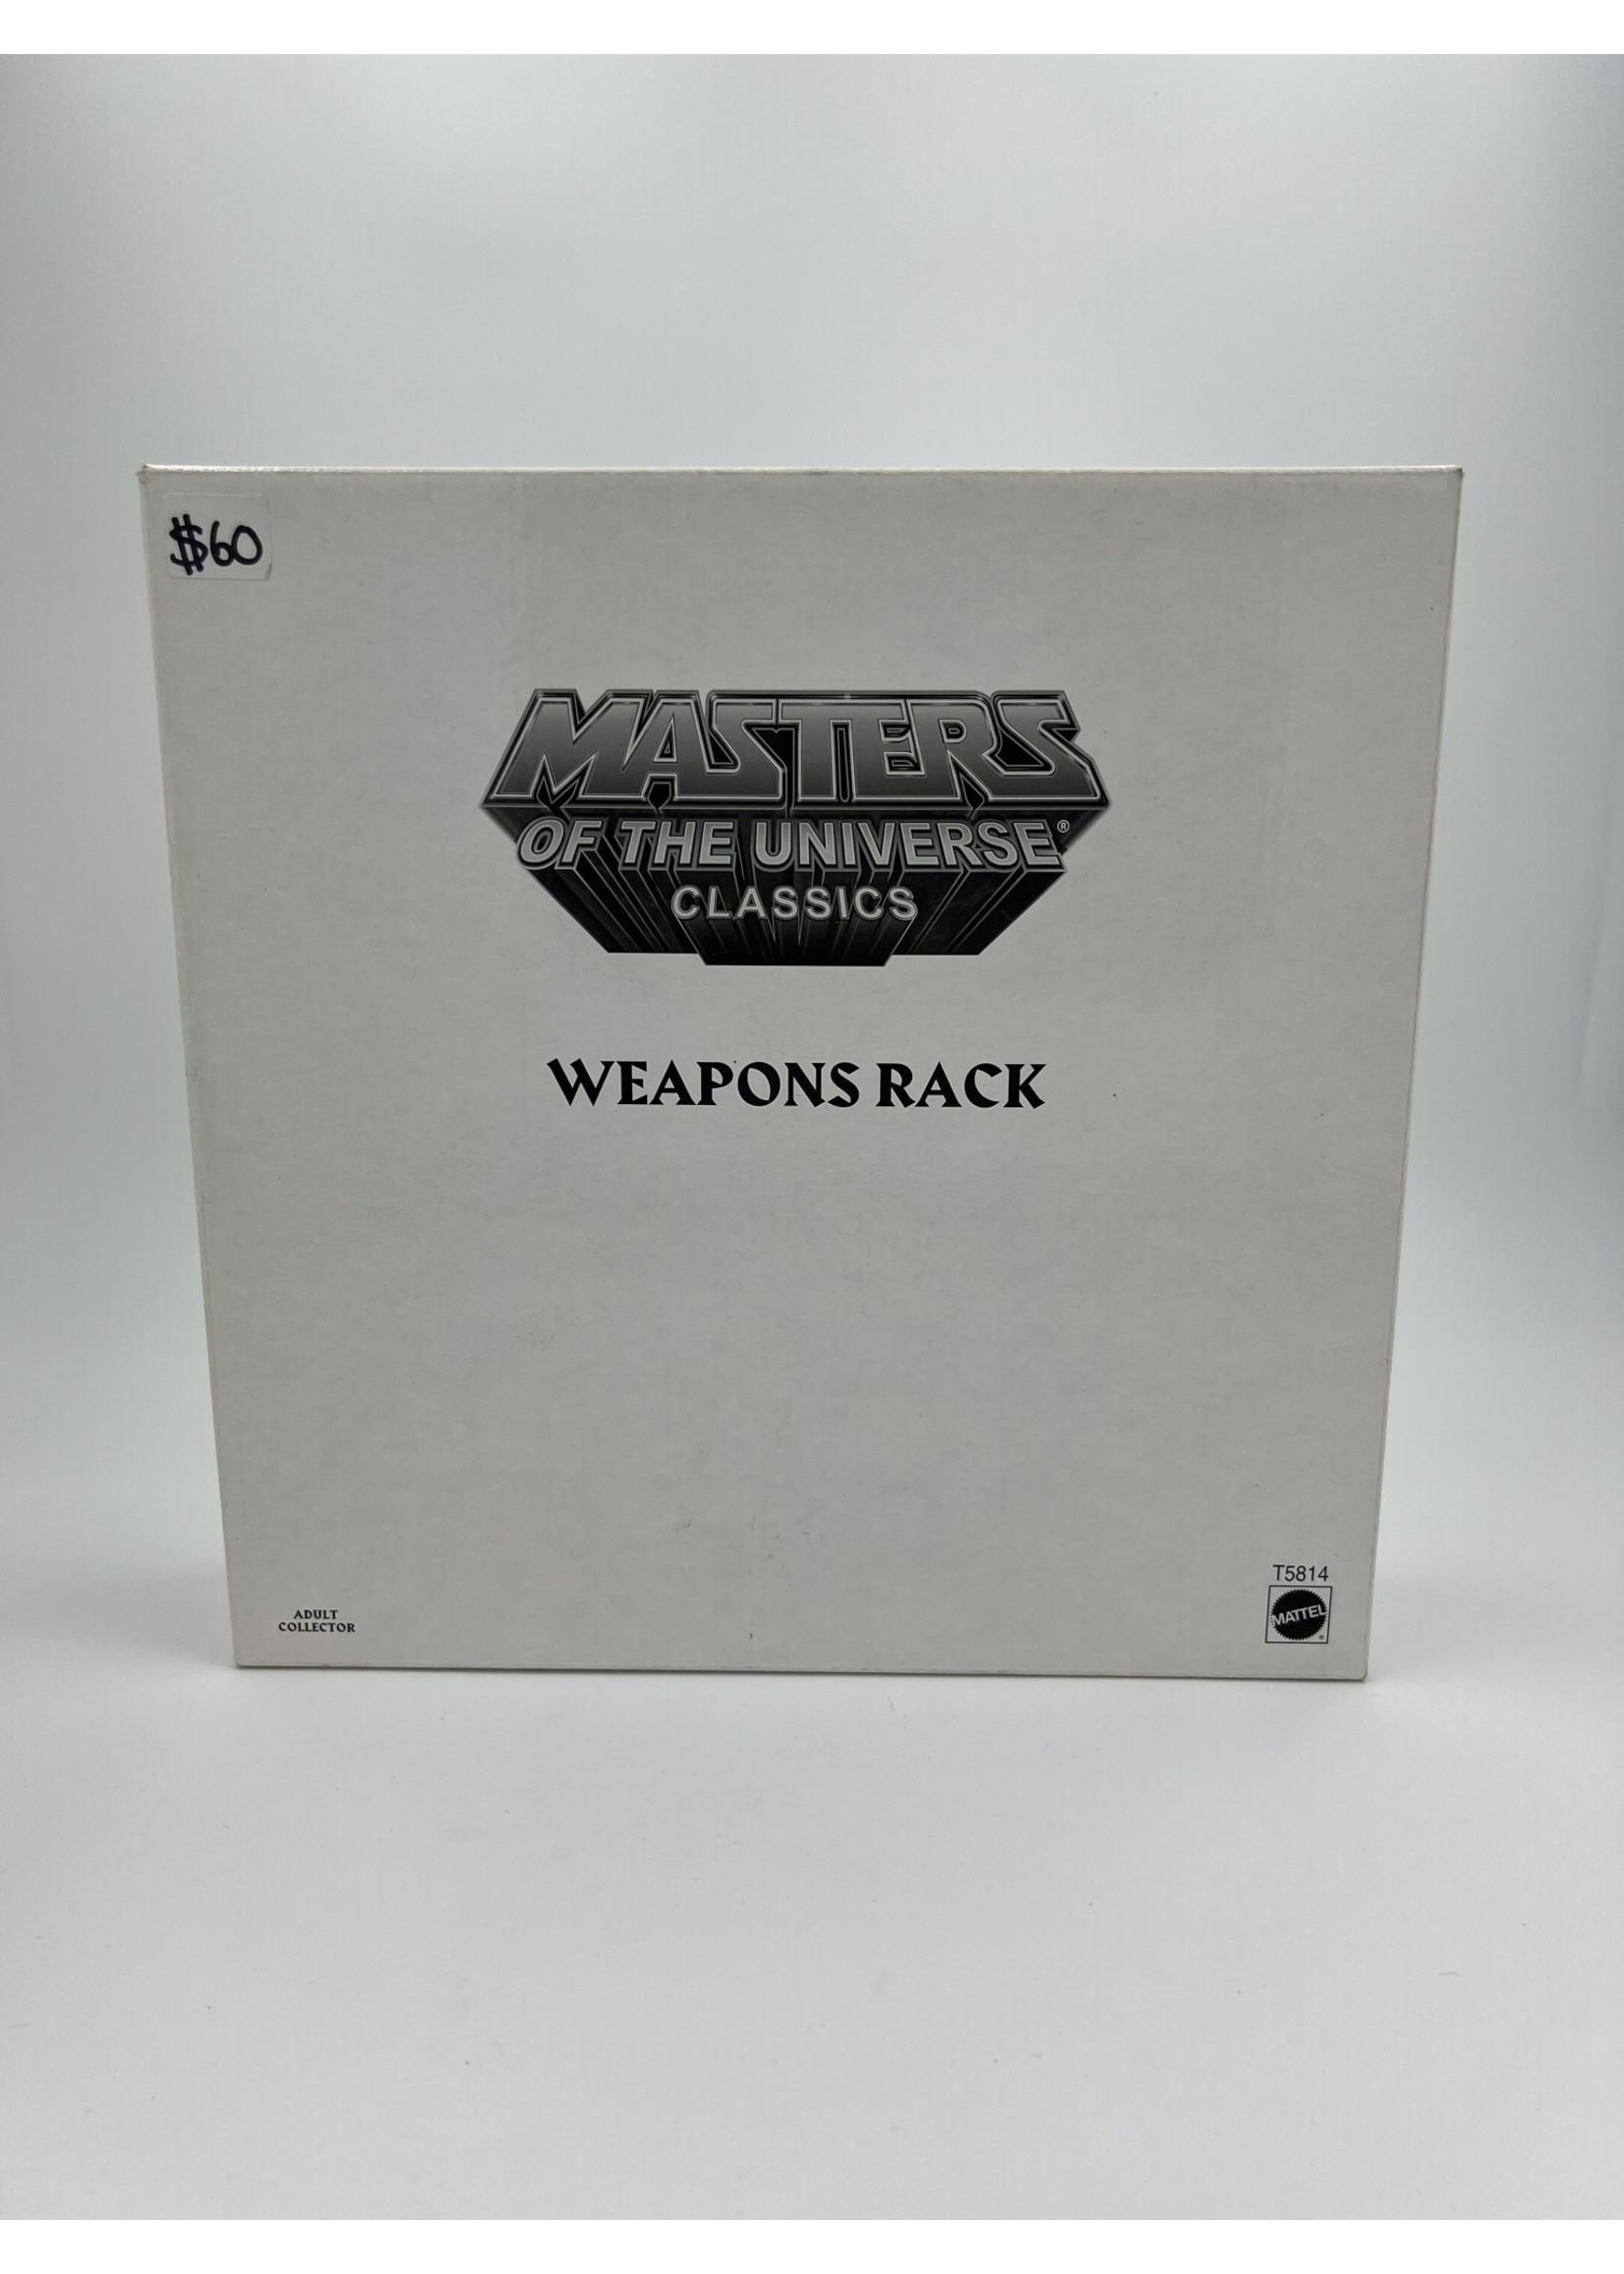 Action Figures Weapon Rack Masters Of The Universe Classics With Mailer Box